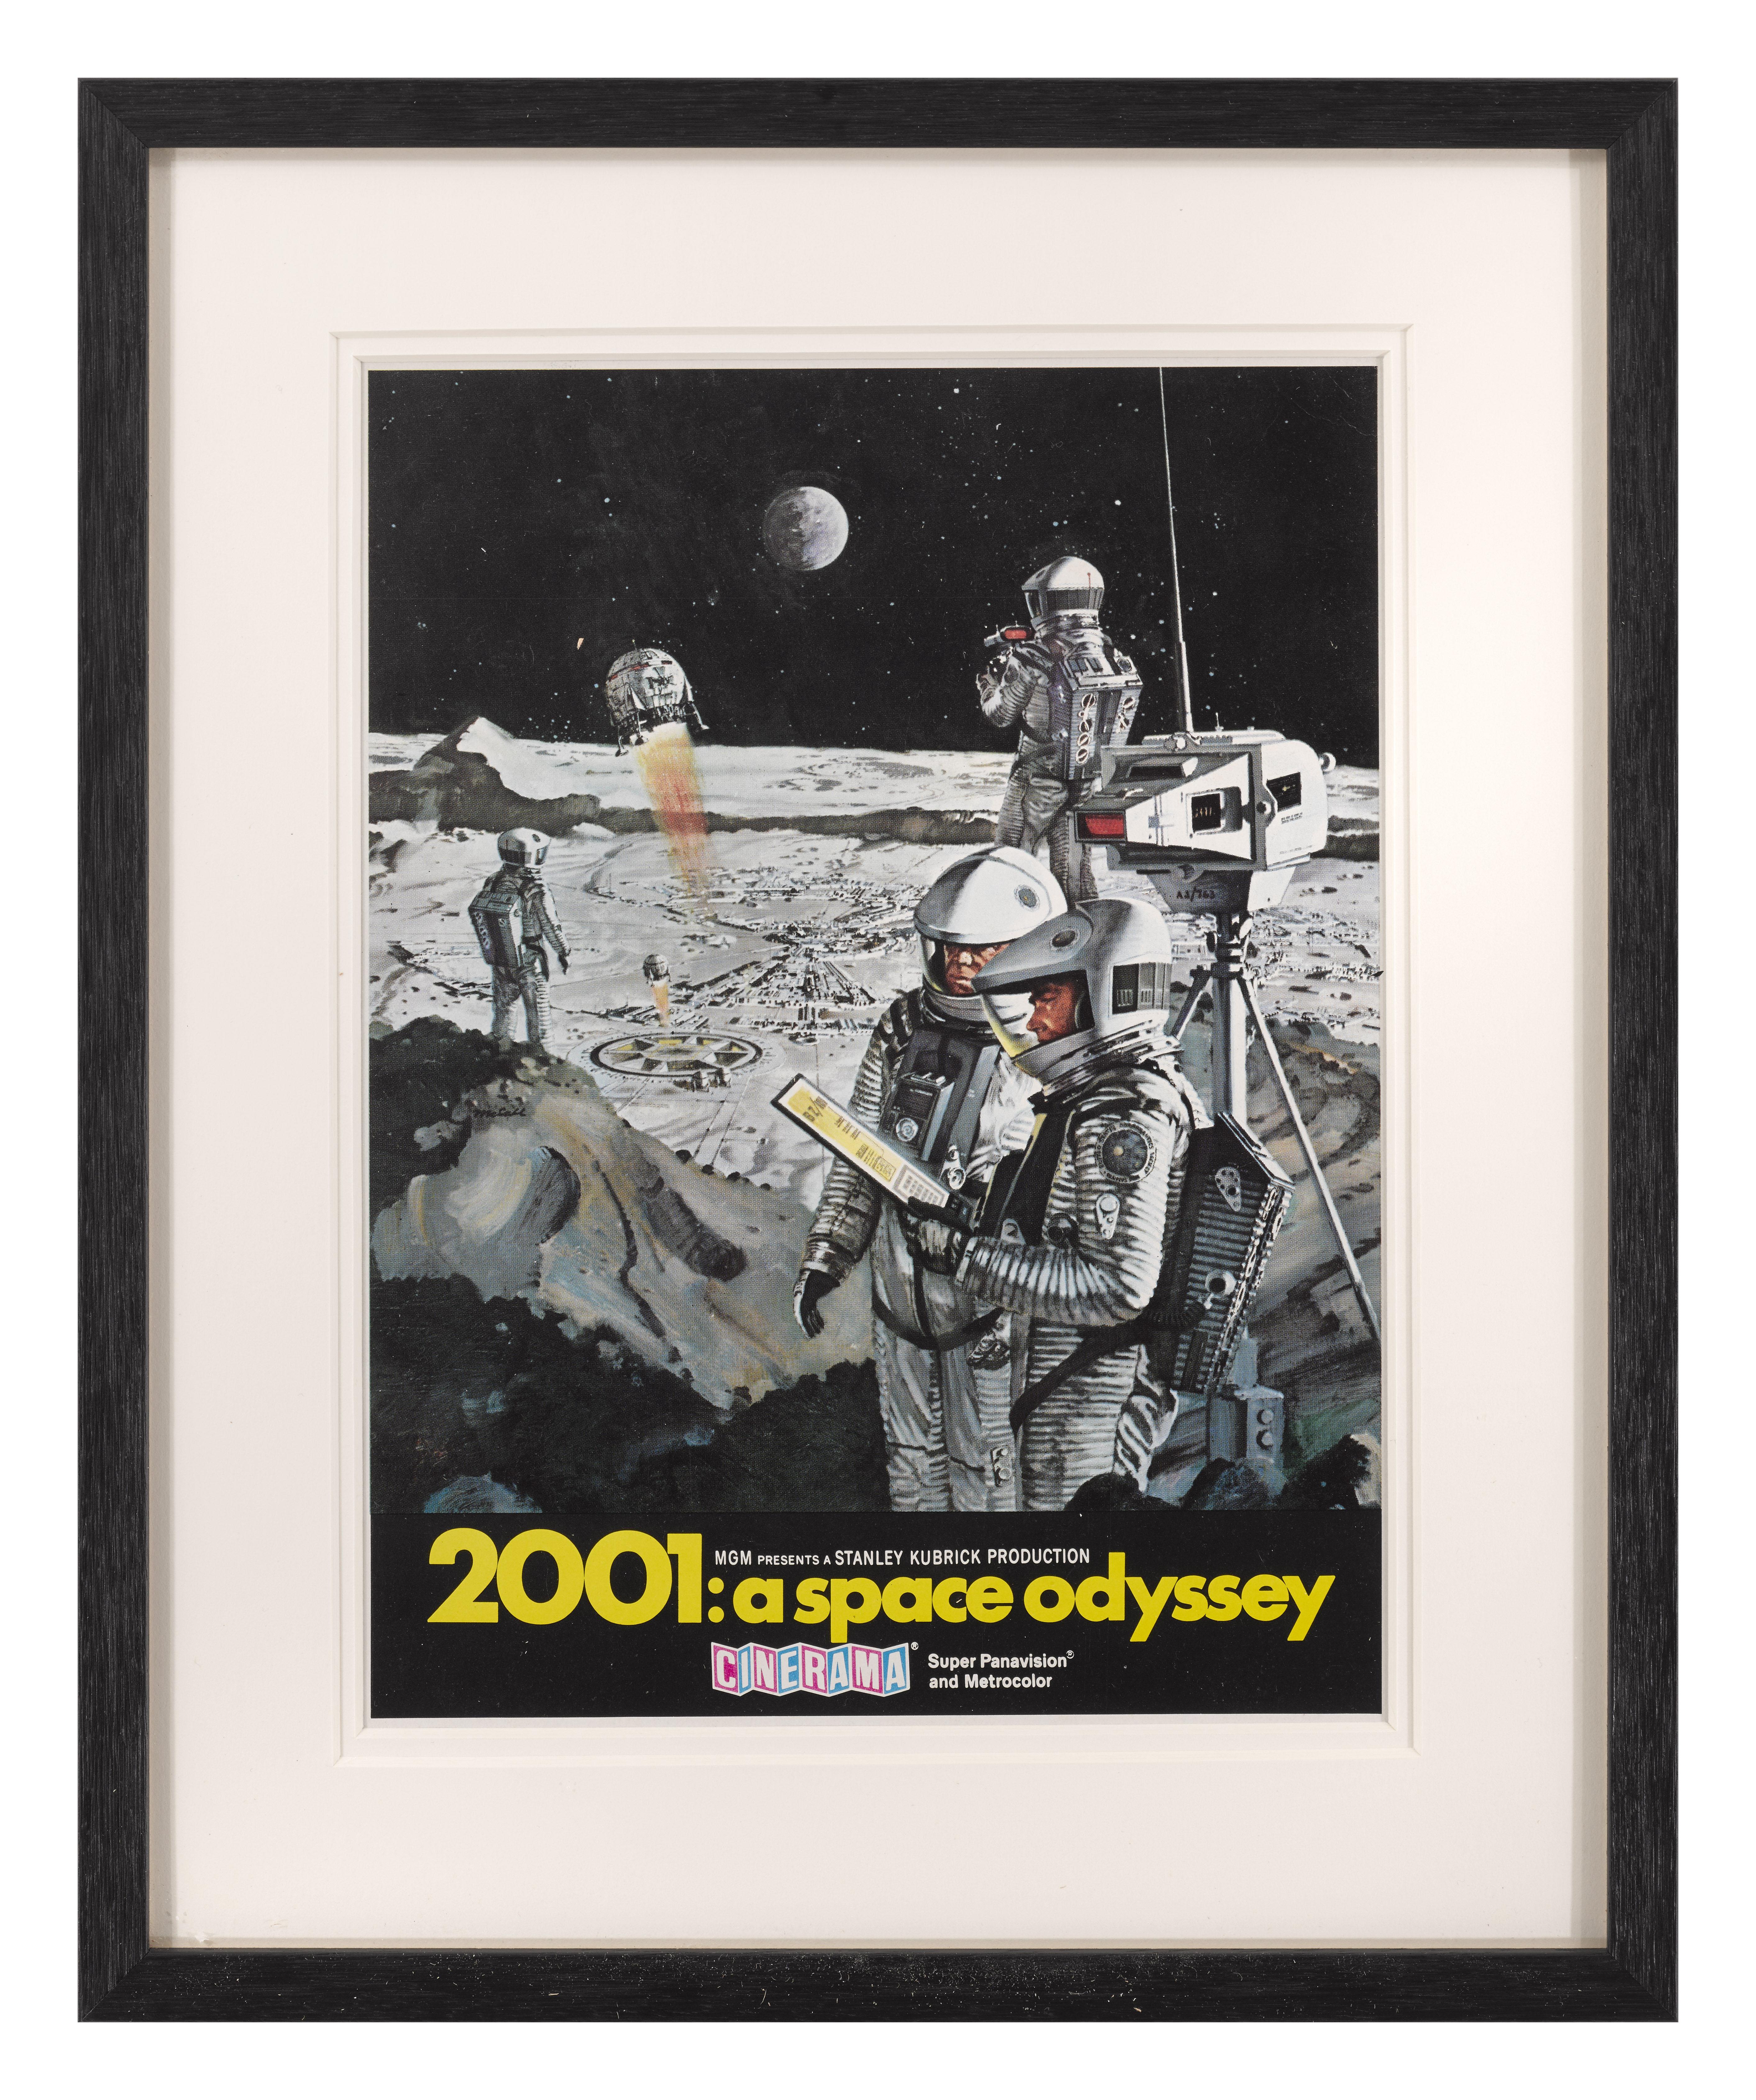 Original US Cinerama style midget window card for Stanley Kubrick's 2001: A Space Odyssey.
This is the smallest poster in the American poster campaign. This piece is conservation framed with UV plexiglass in a Tulip wood frame with card mounts and